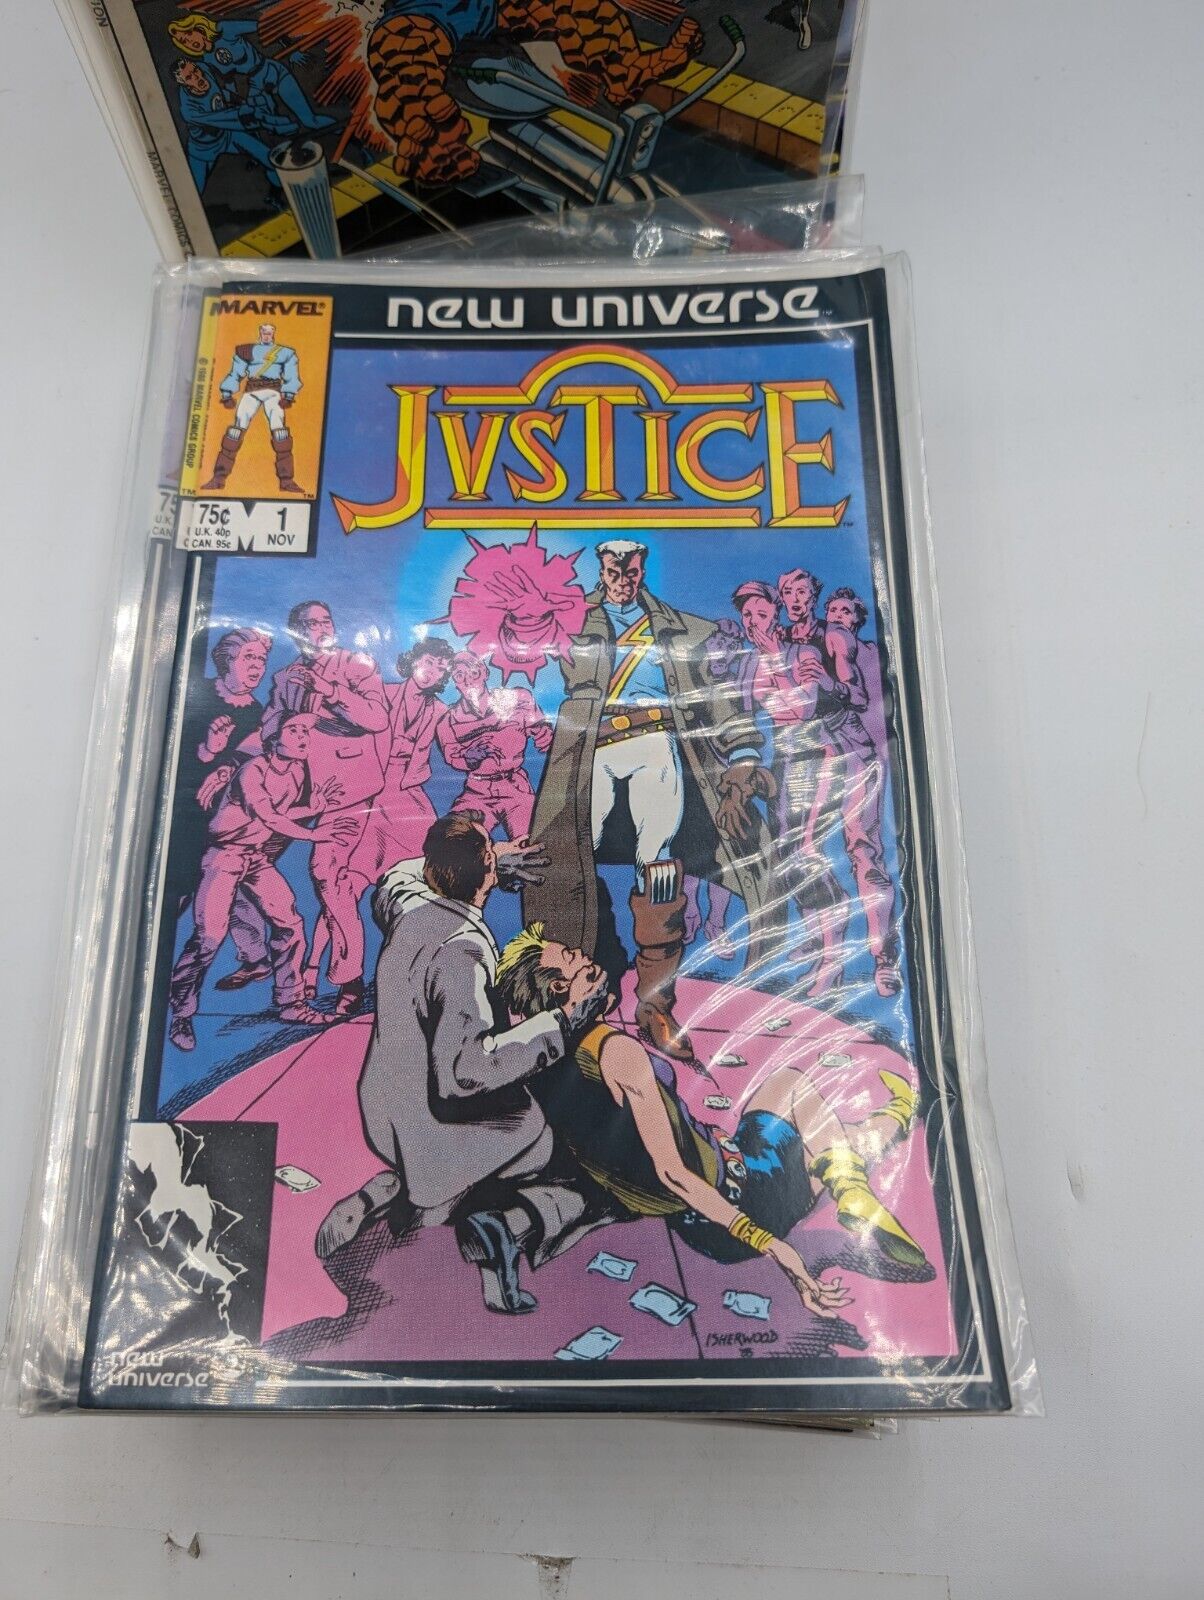 JUSTICE #1 NEW UNIVERSE 1986 MARVEL